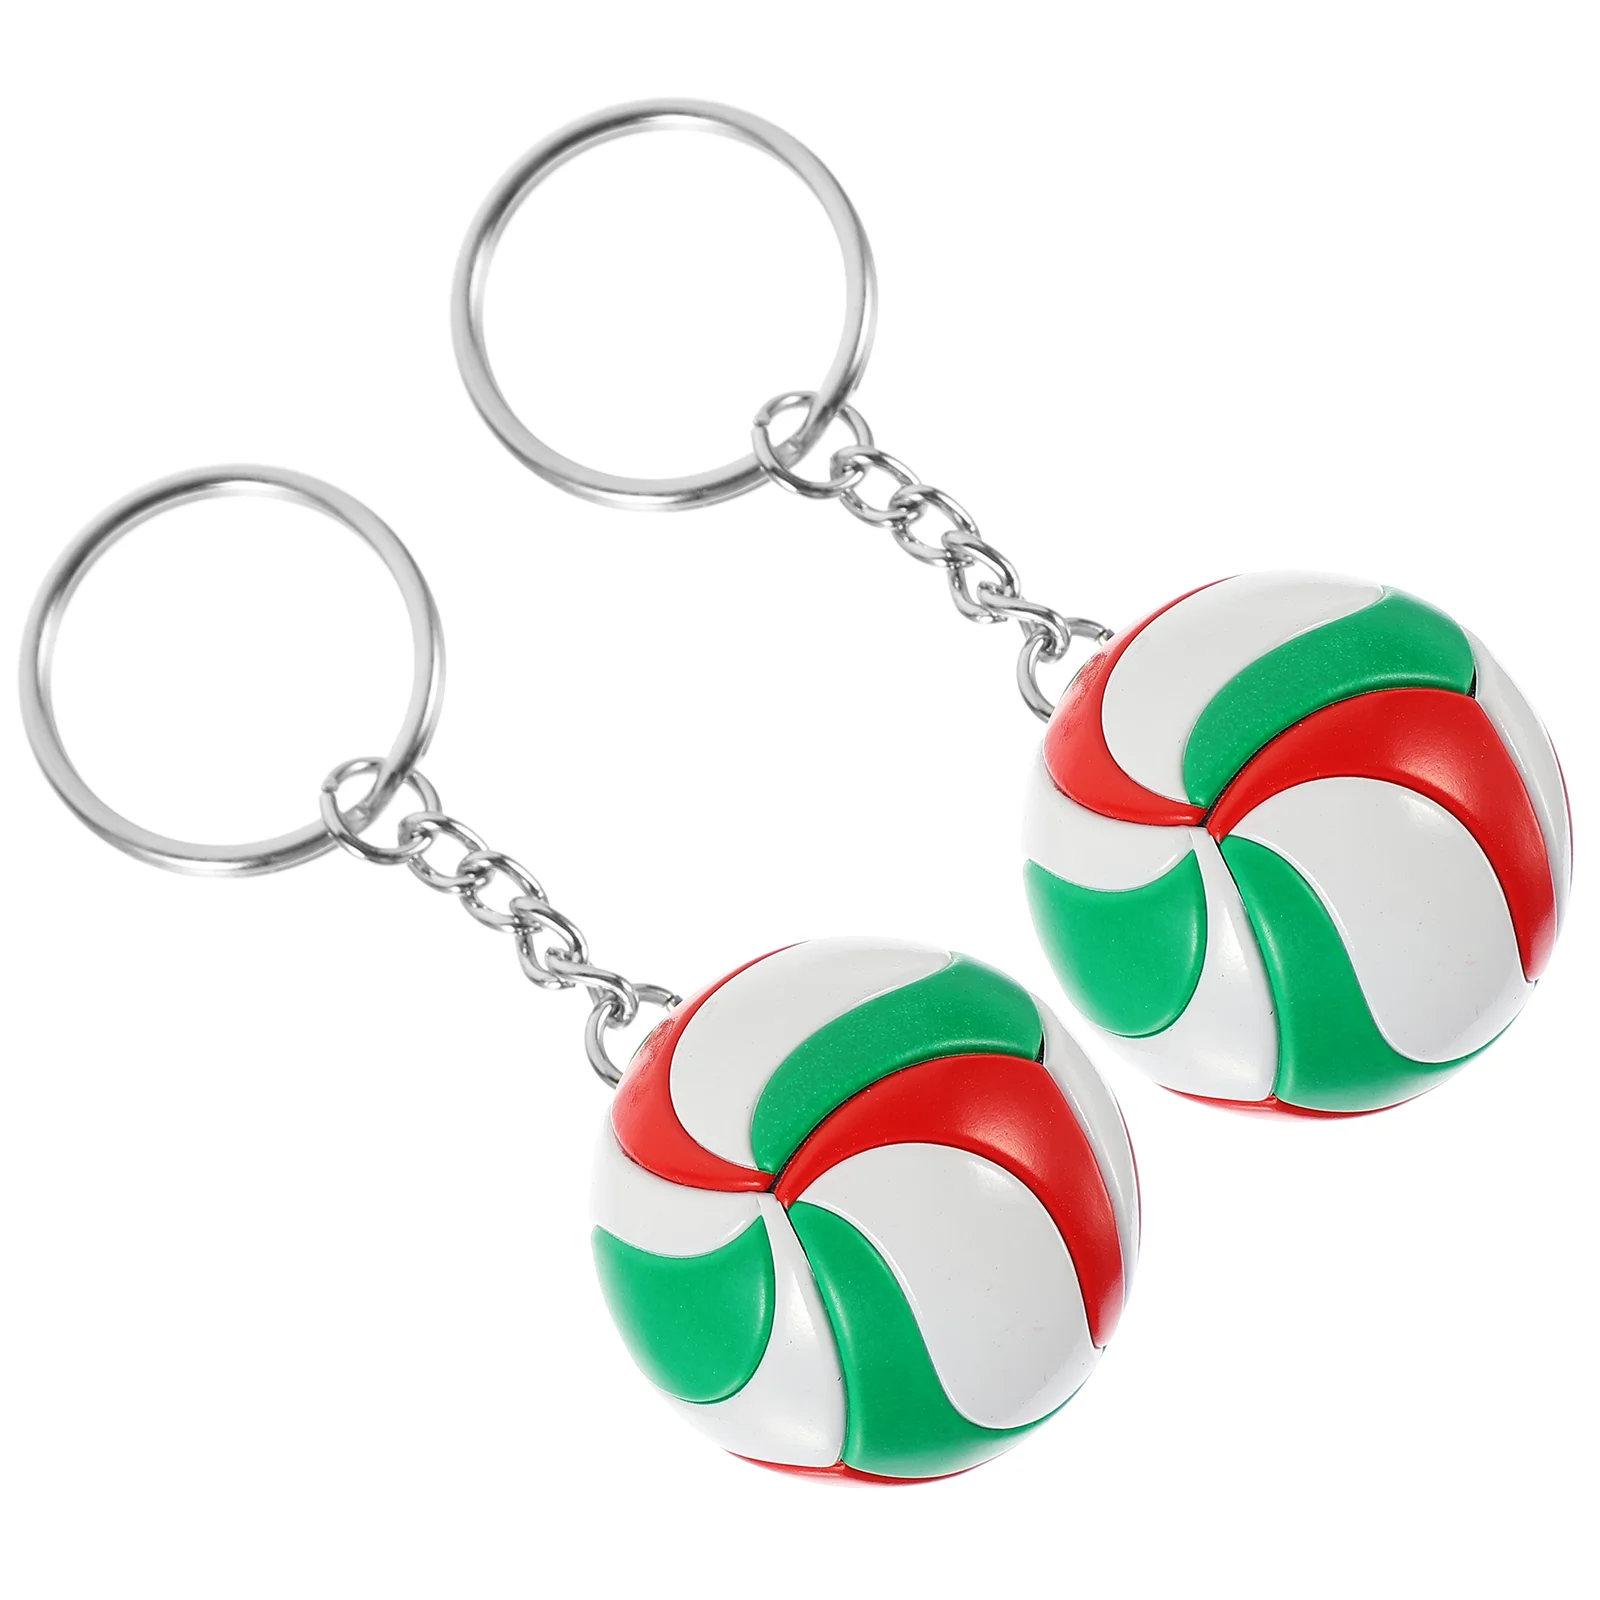 

2 Pcs Volleyball Model Toy Key Chain Keychains Team Rings Car Keys Souvenir Hanging Bag Pendant Compact Alloy Lovers